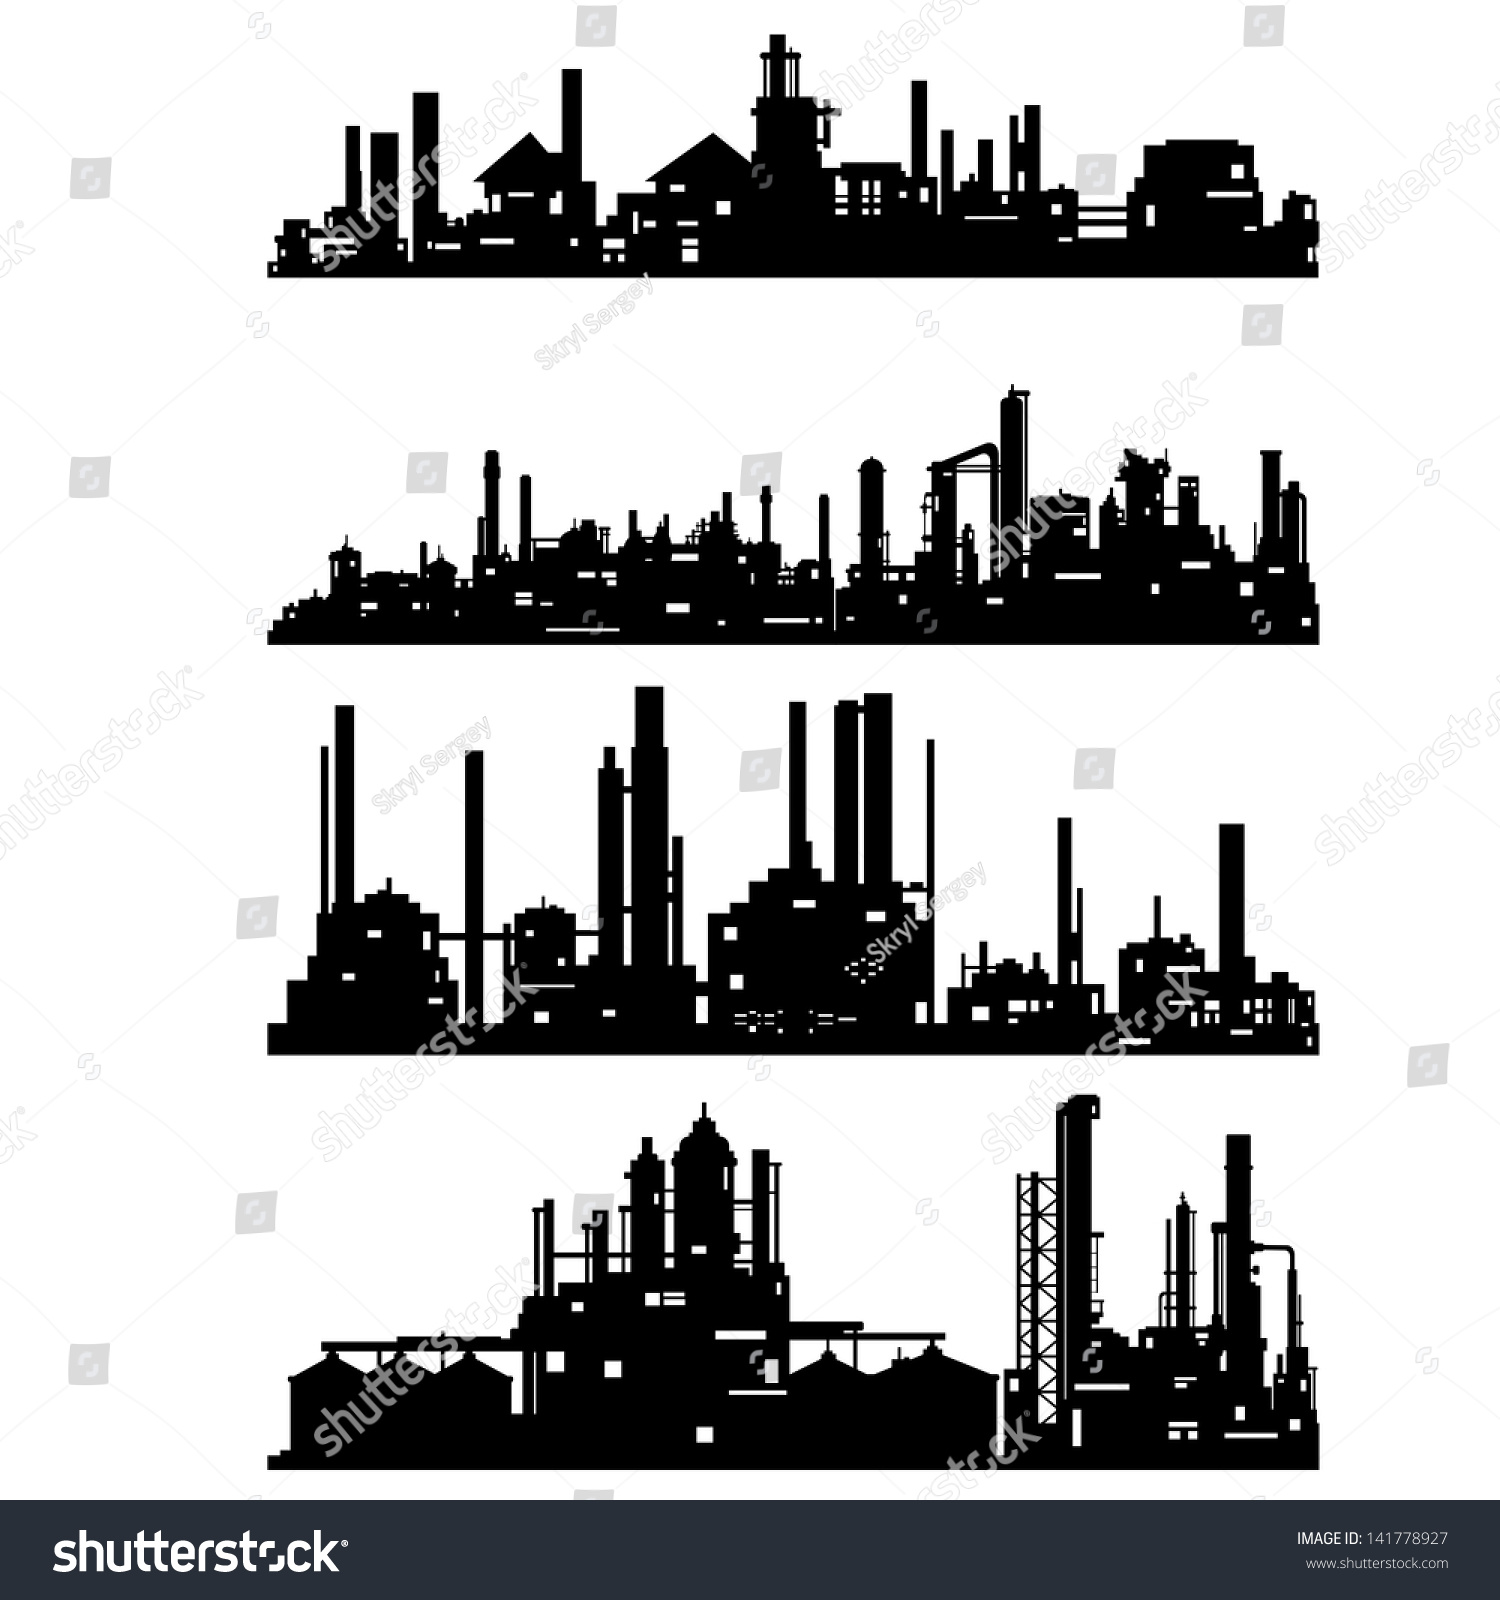 industrial technology clipart - photo #29